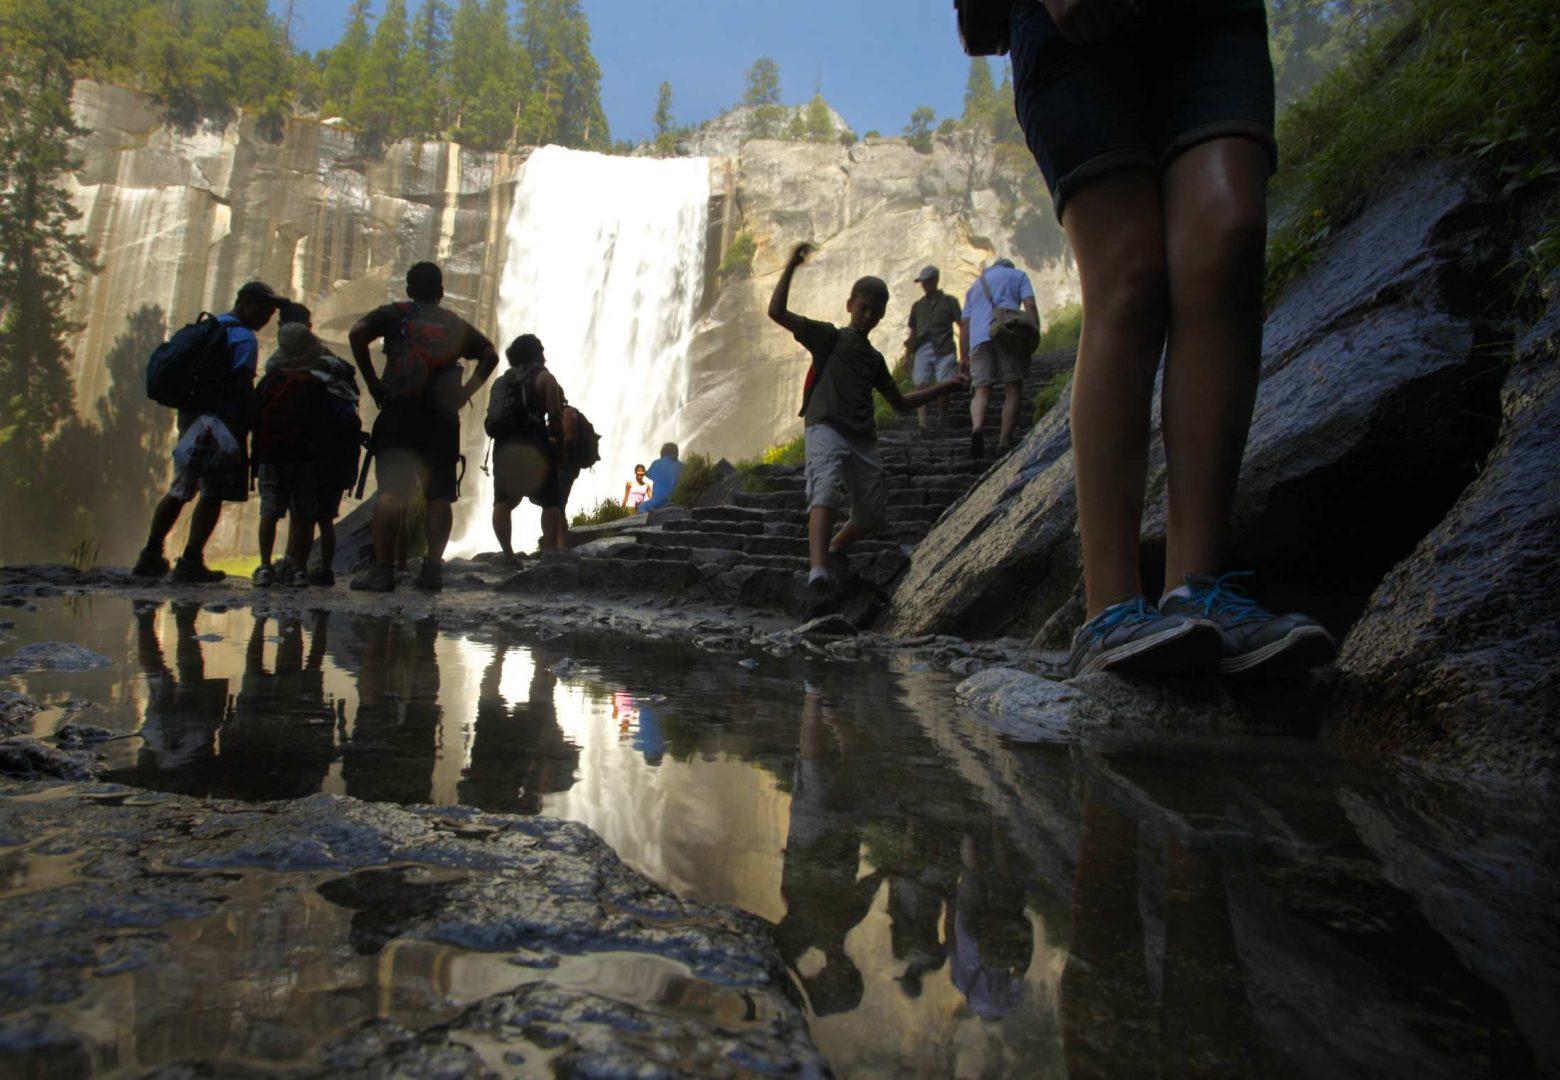 Hikers slop around on the wet rocks on the Mist Trail, which leads to Vernal Fall at Yosemite National Park in California on August 5, 2011.  (Mark Boster/Los Angeles Times/MCT)